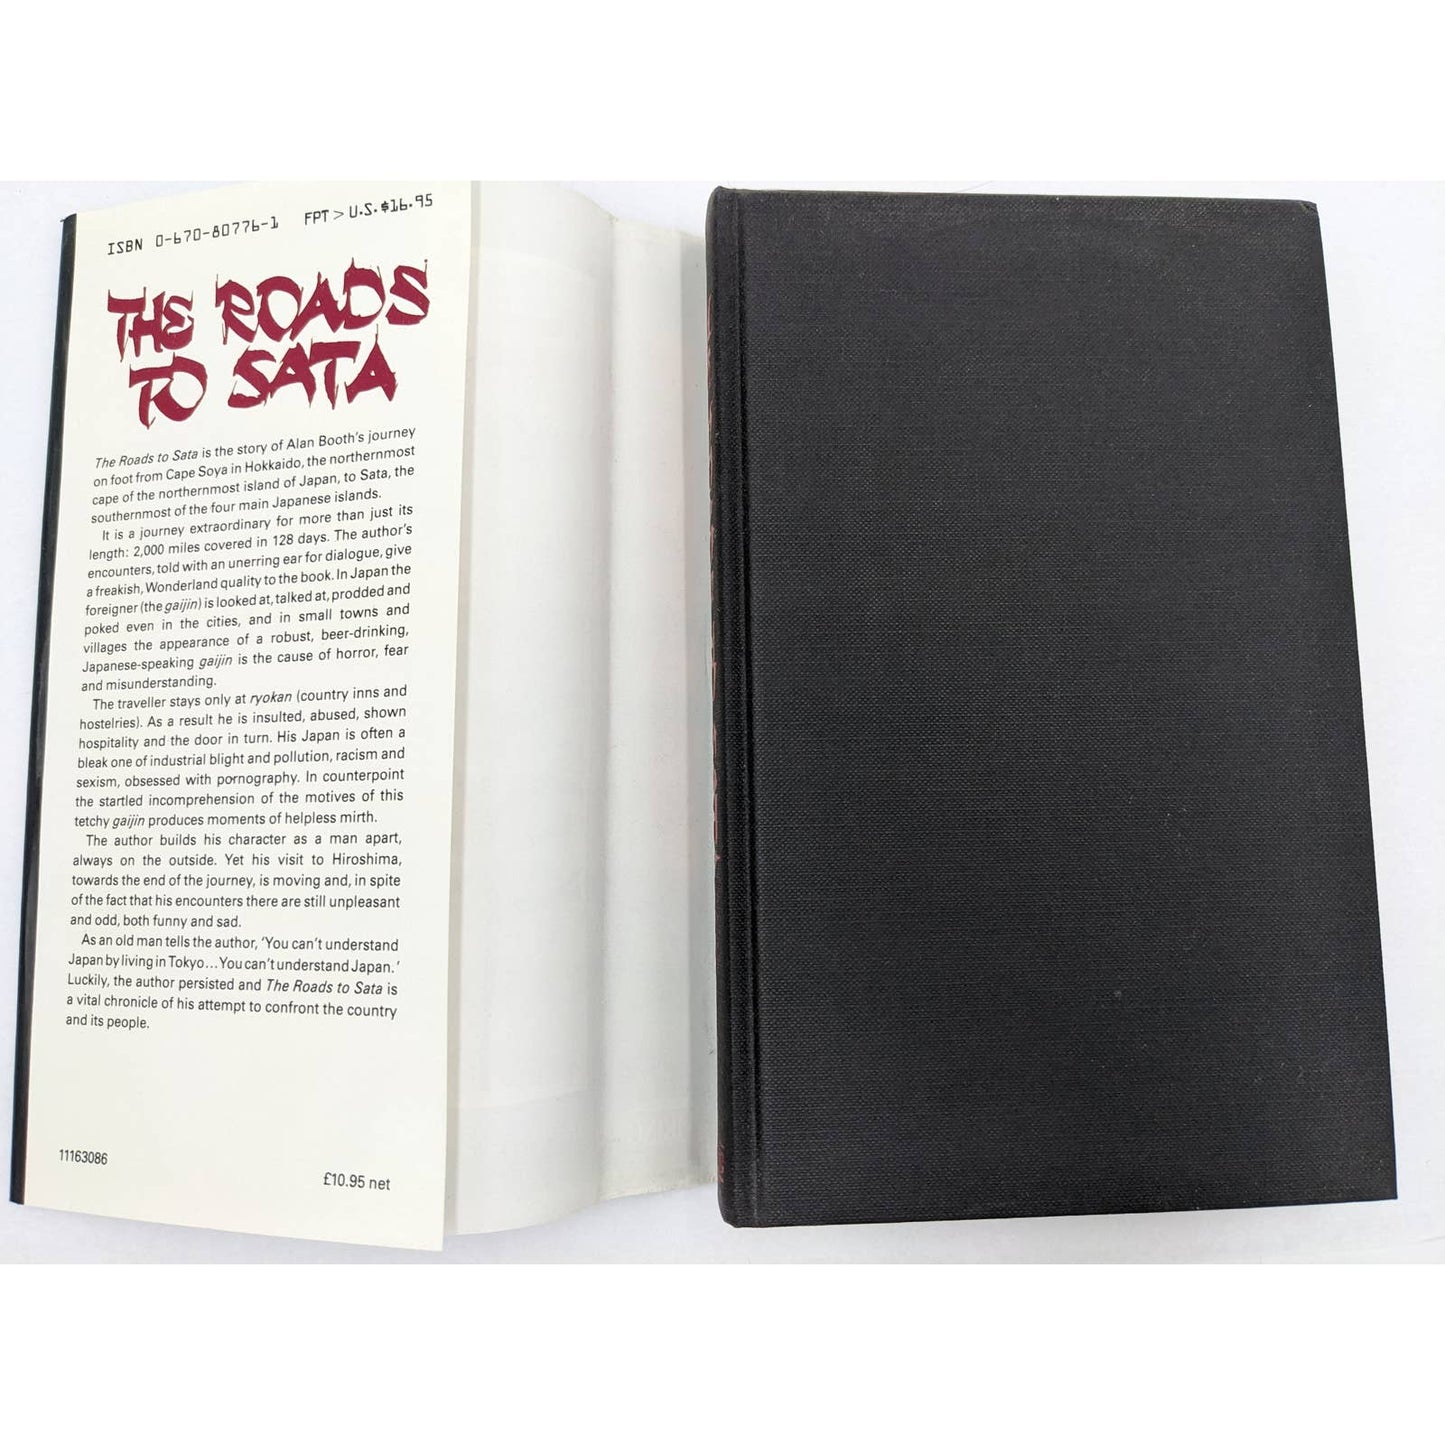 Roads To Sata A 2000-Mile Walk Through Japan By Alan Booth Travel Vintage 1985